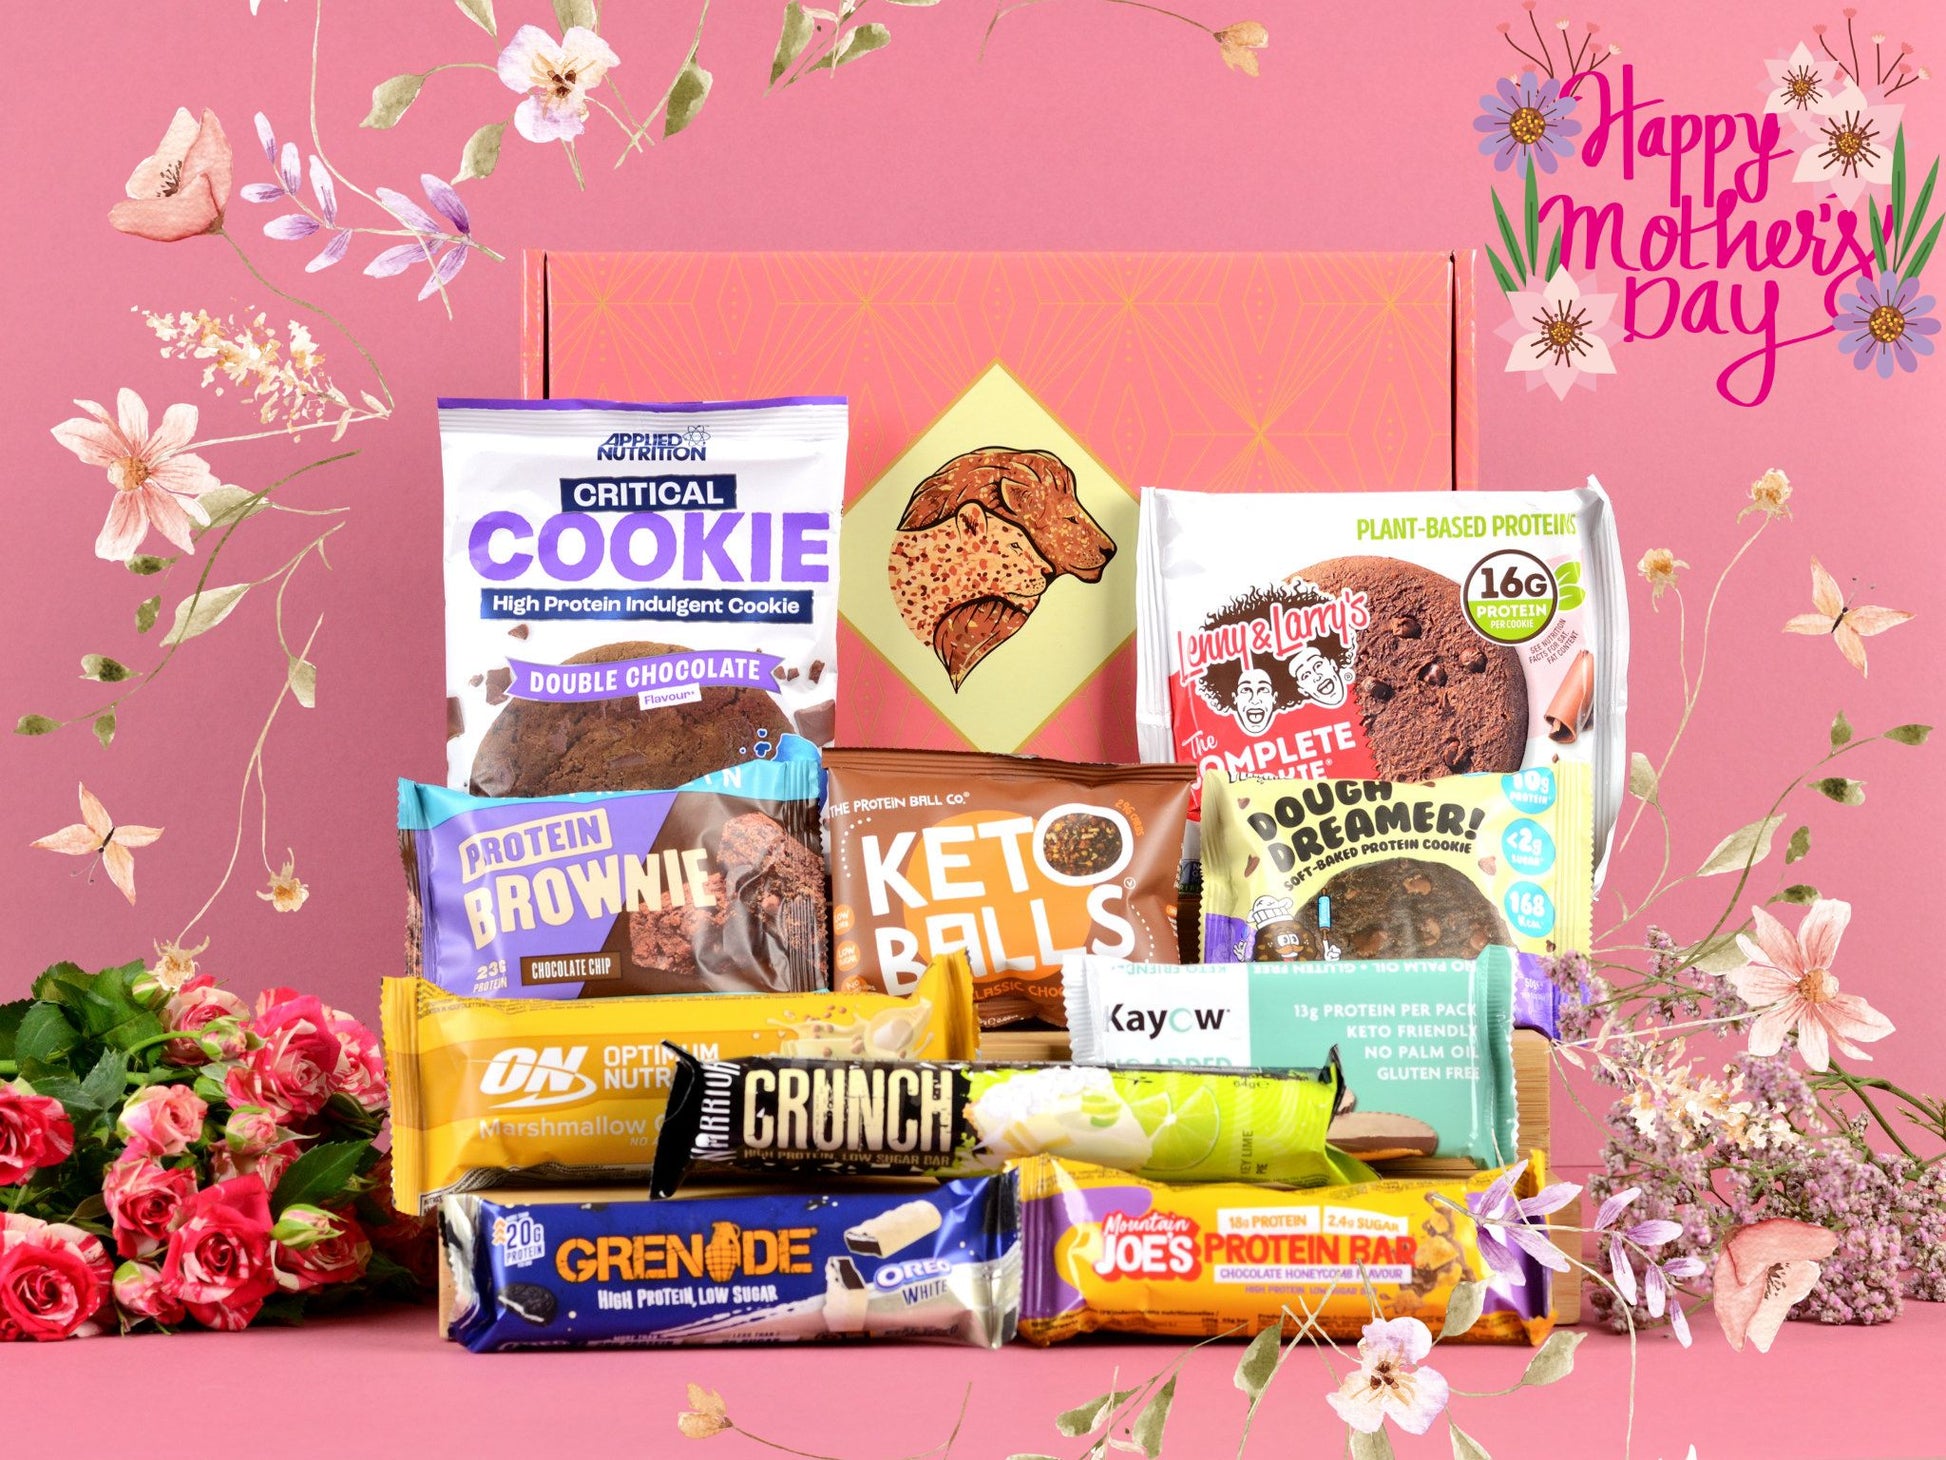 Box Of Protein | Protein Mothers Day Gift Box | Mothers Day Flowers Roses | Protein Snacks Hamper | Kayow, Lenny & Larrys, MyProtein Brownie, Grenade, Mountain Joes, Yummios, Keto Keto, Protein Ball Co., Optimum Nutrition, Warrior Crunch, Applied Nutrition